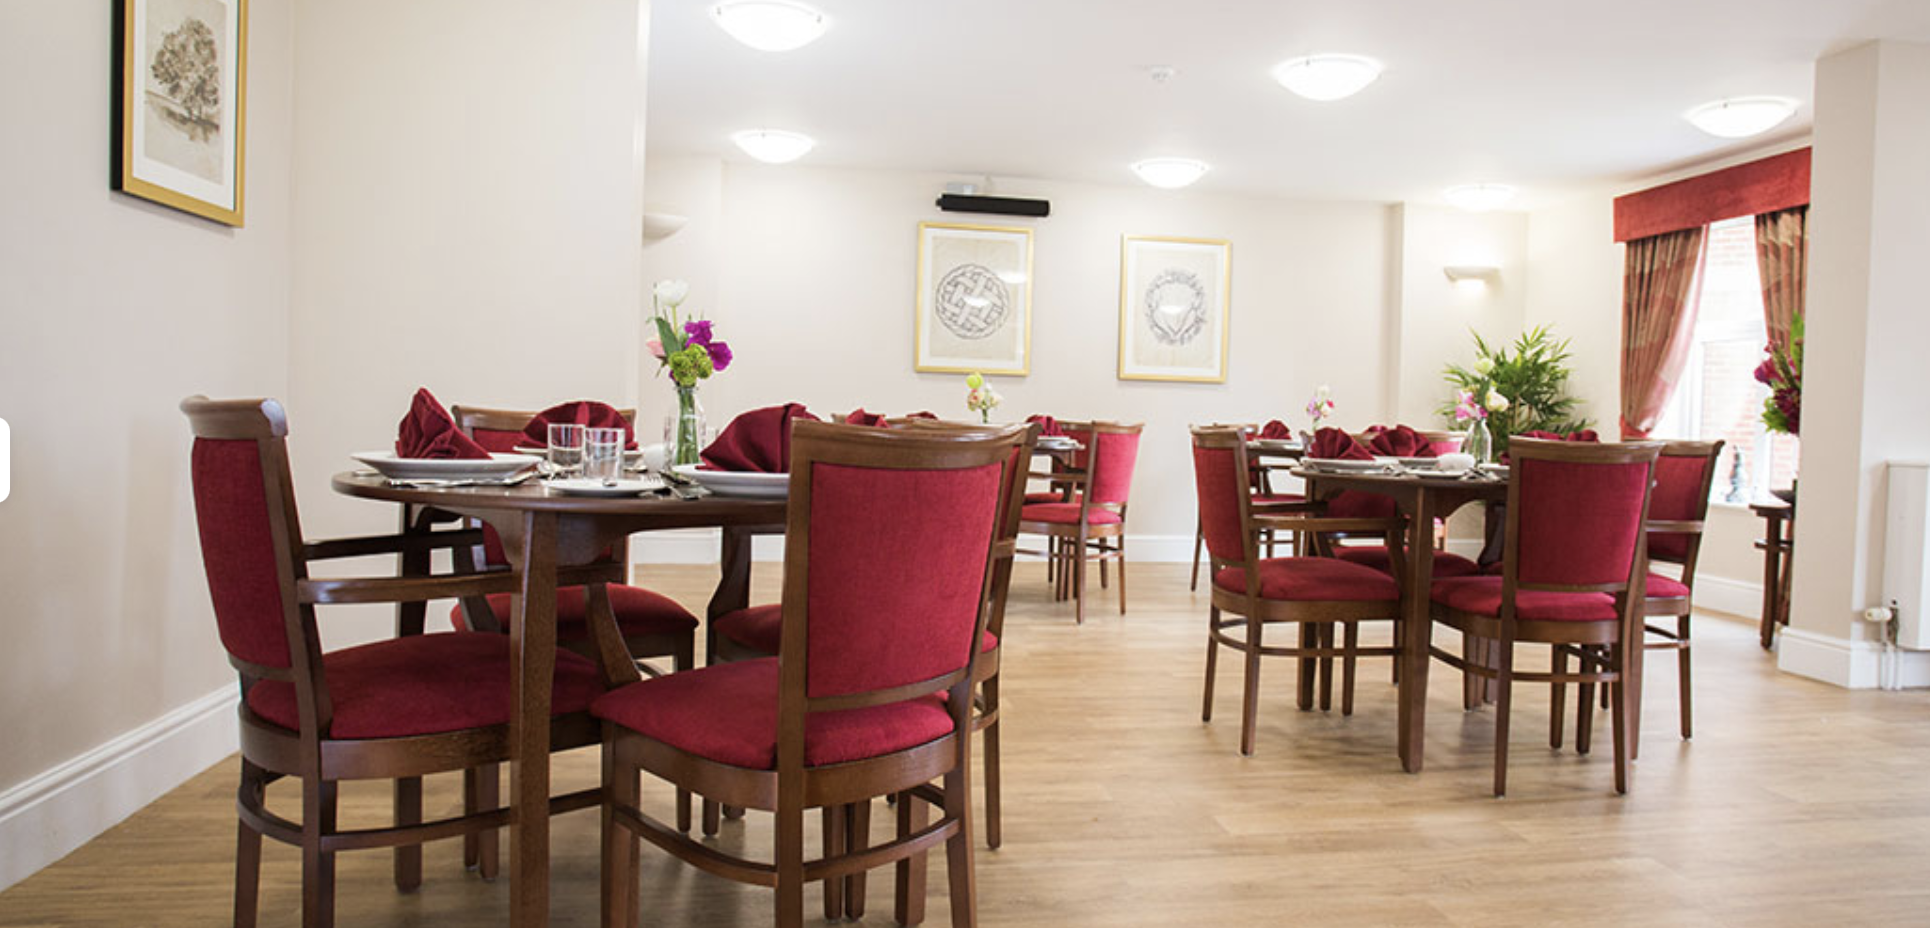 Dining room of Ardenlea Court care home in Solihull, West Midlands